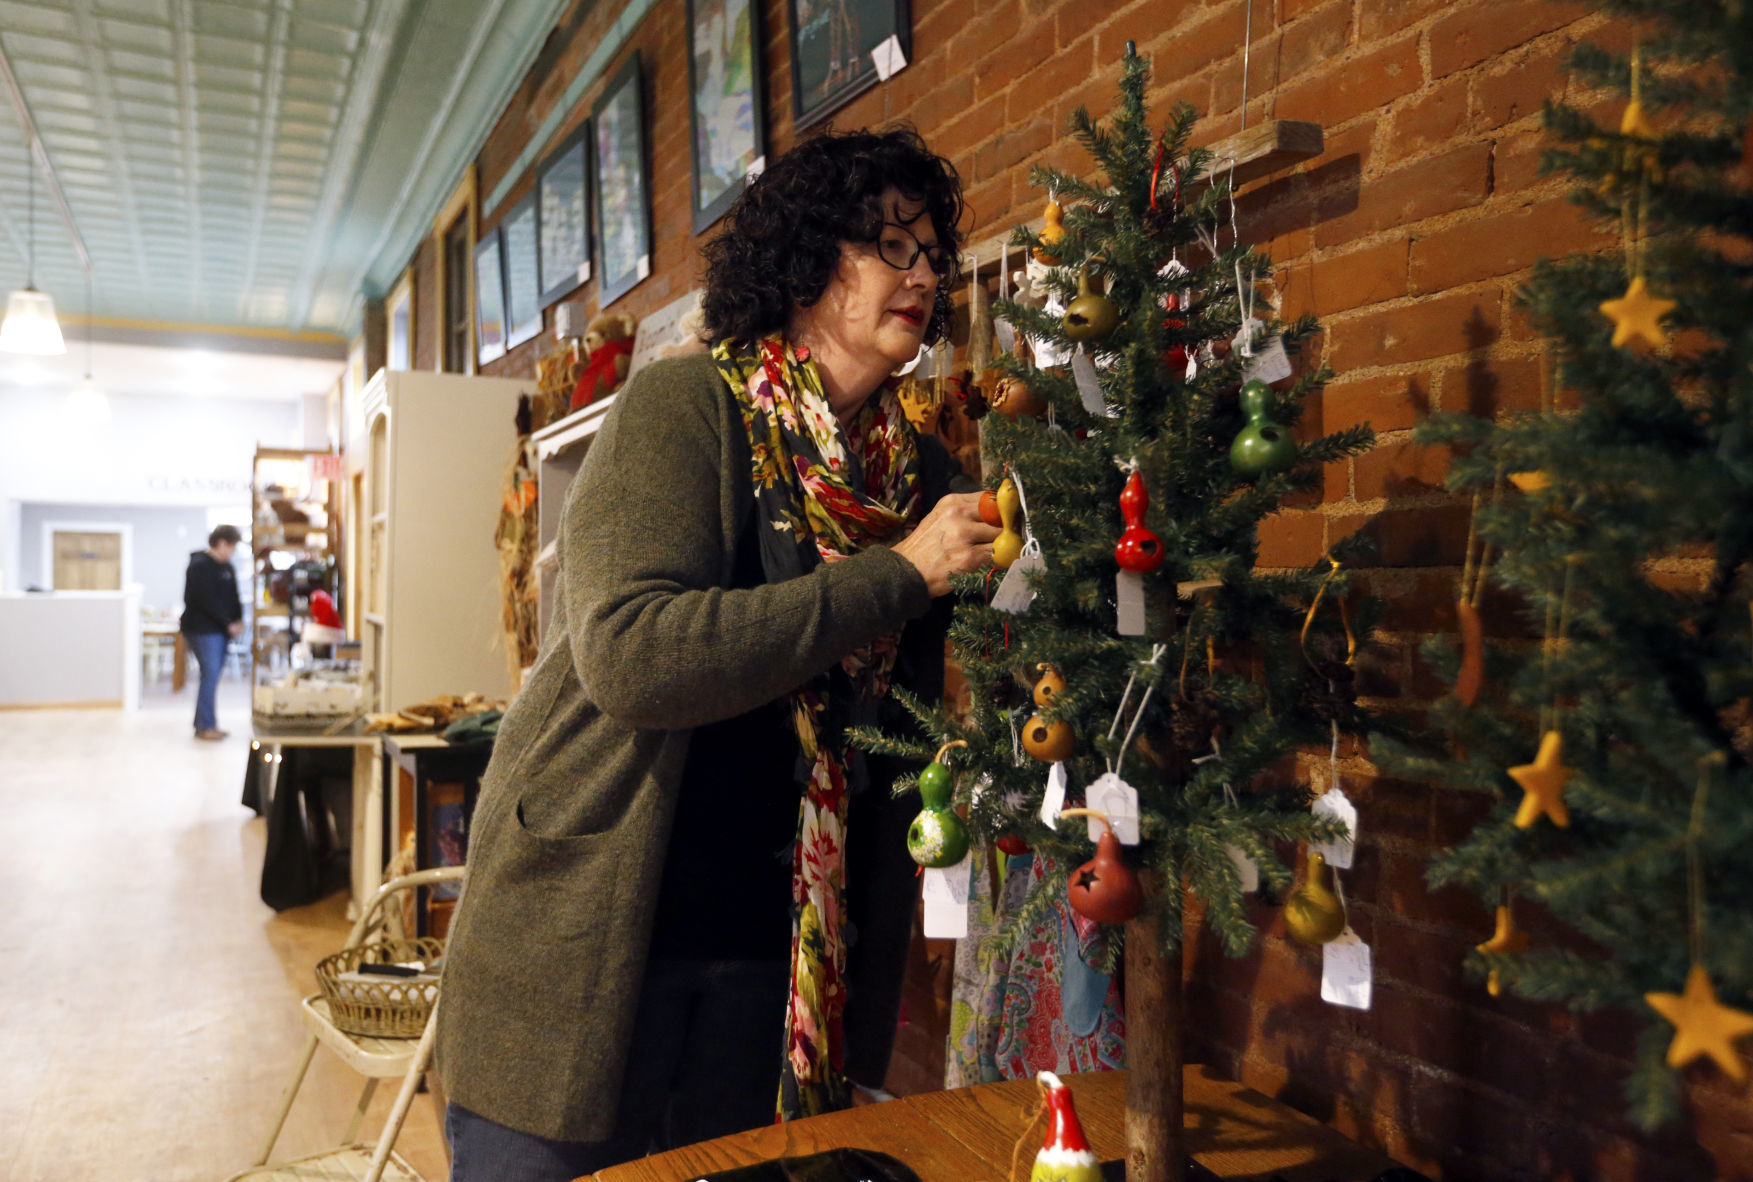 Sandra Evans, of Dubuque, displays some of her ornaments on a tree Friday at Central Avenue Mercantile in Dubuque. PHOTO CREDIT: EILEEN MESLAR